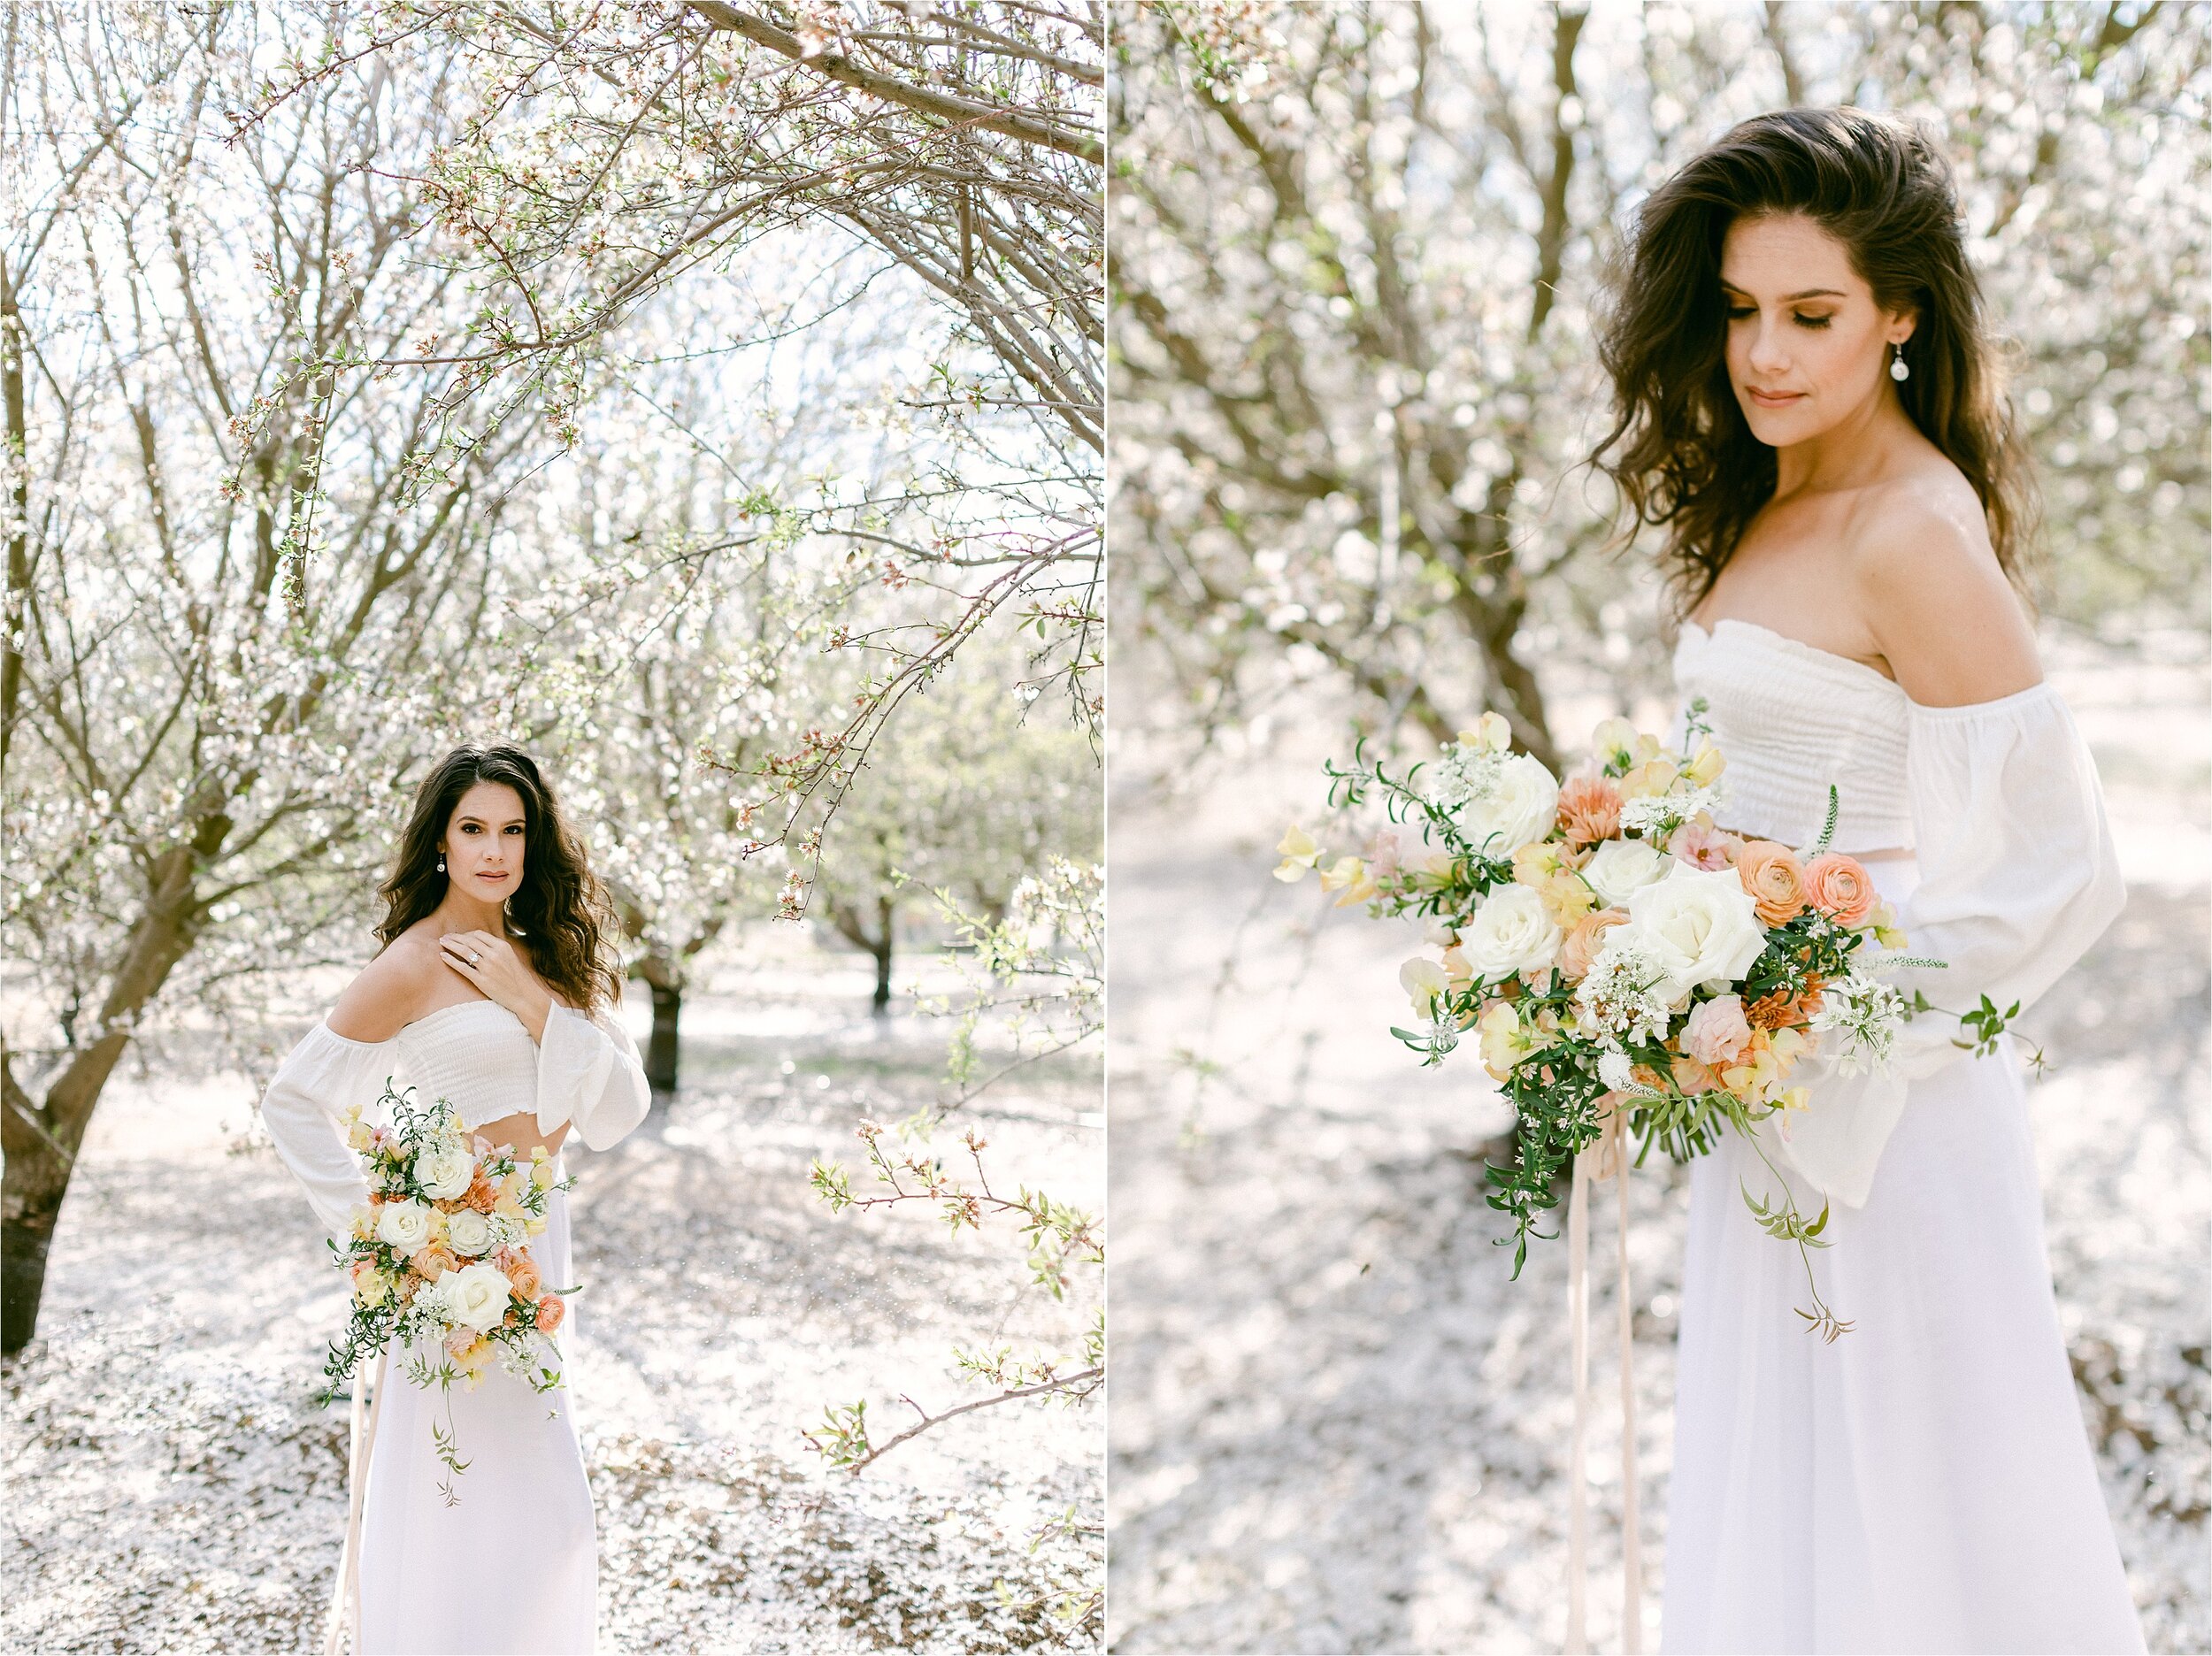 Bride posing in almond groves, one of the best photo locations in Southern California